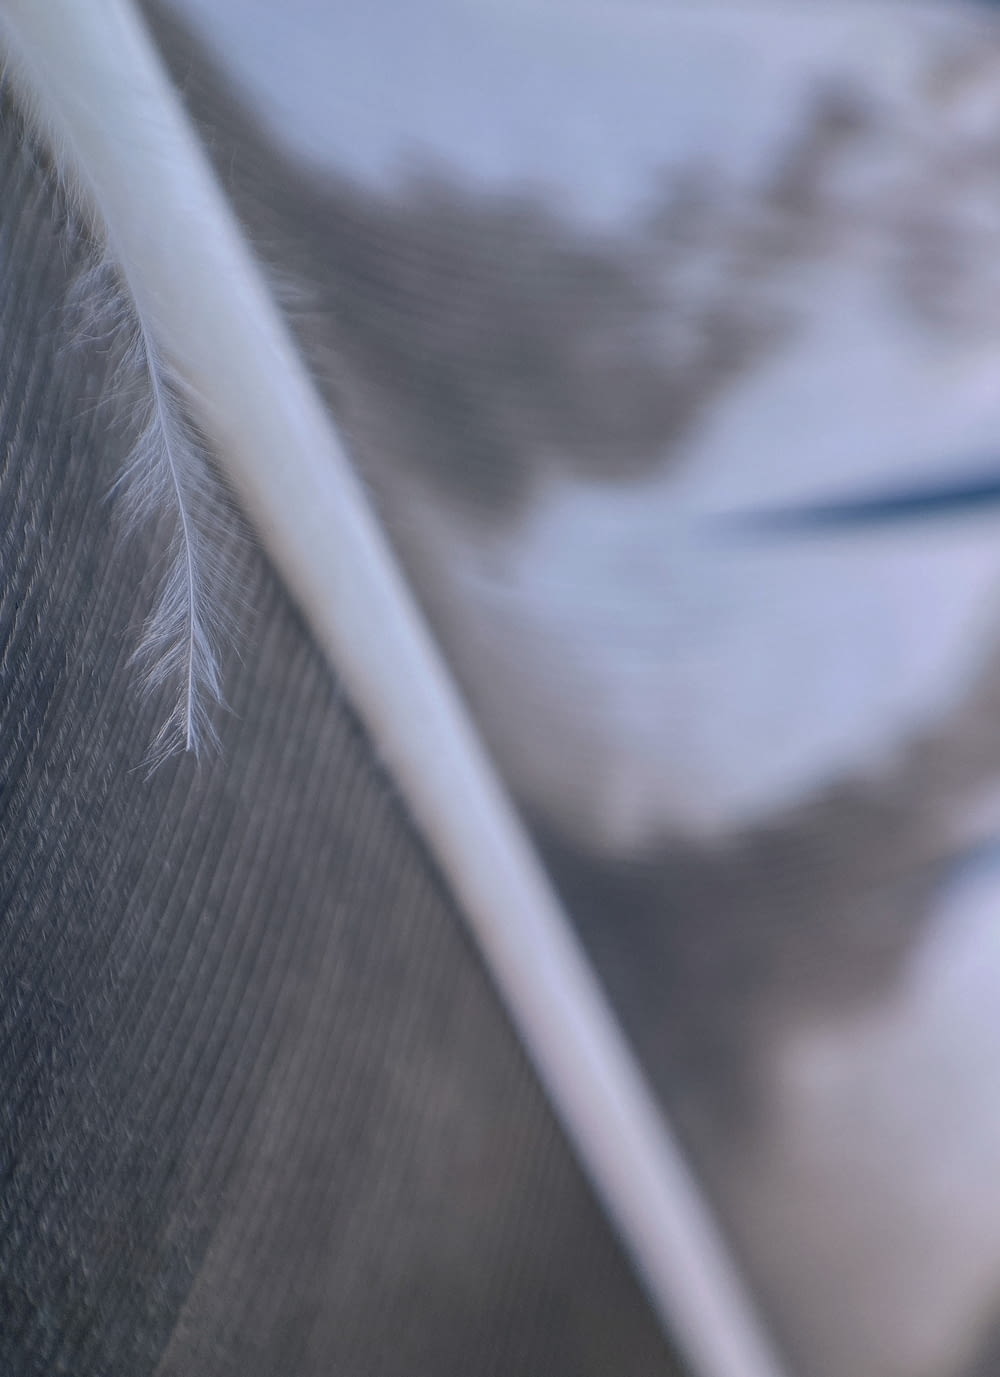 a close up of a feather with a blurry background